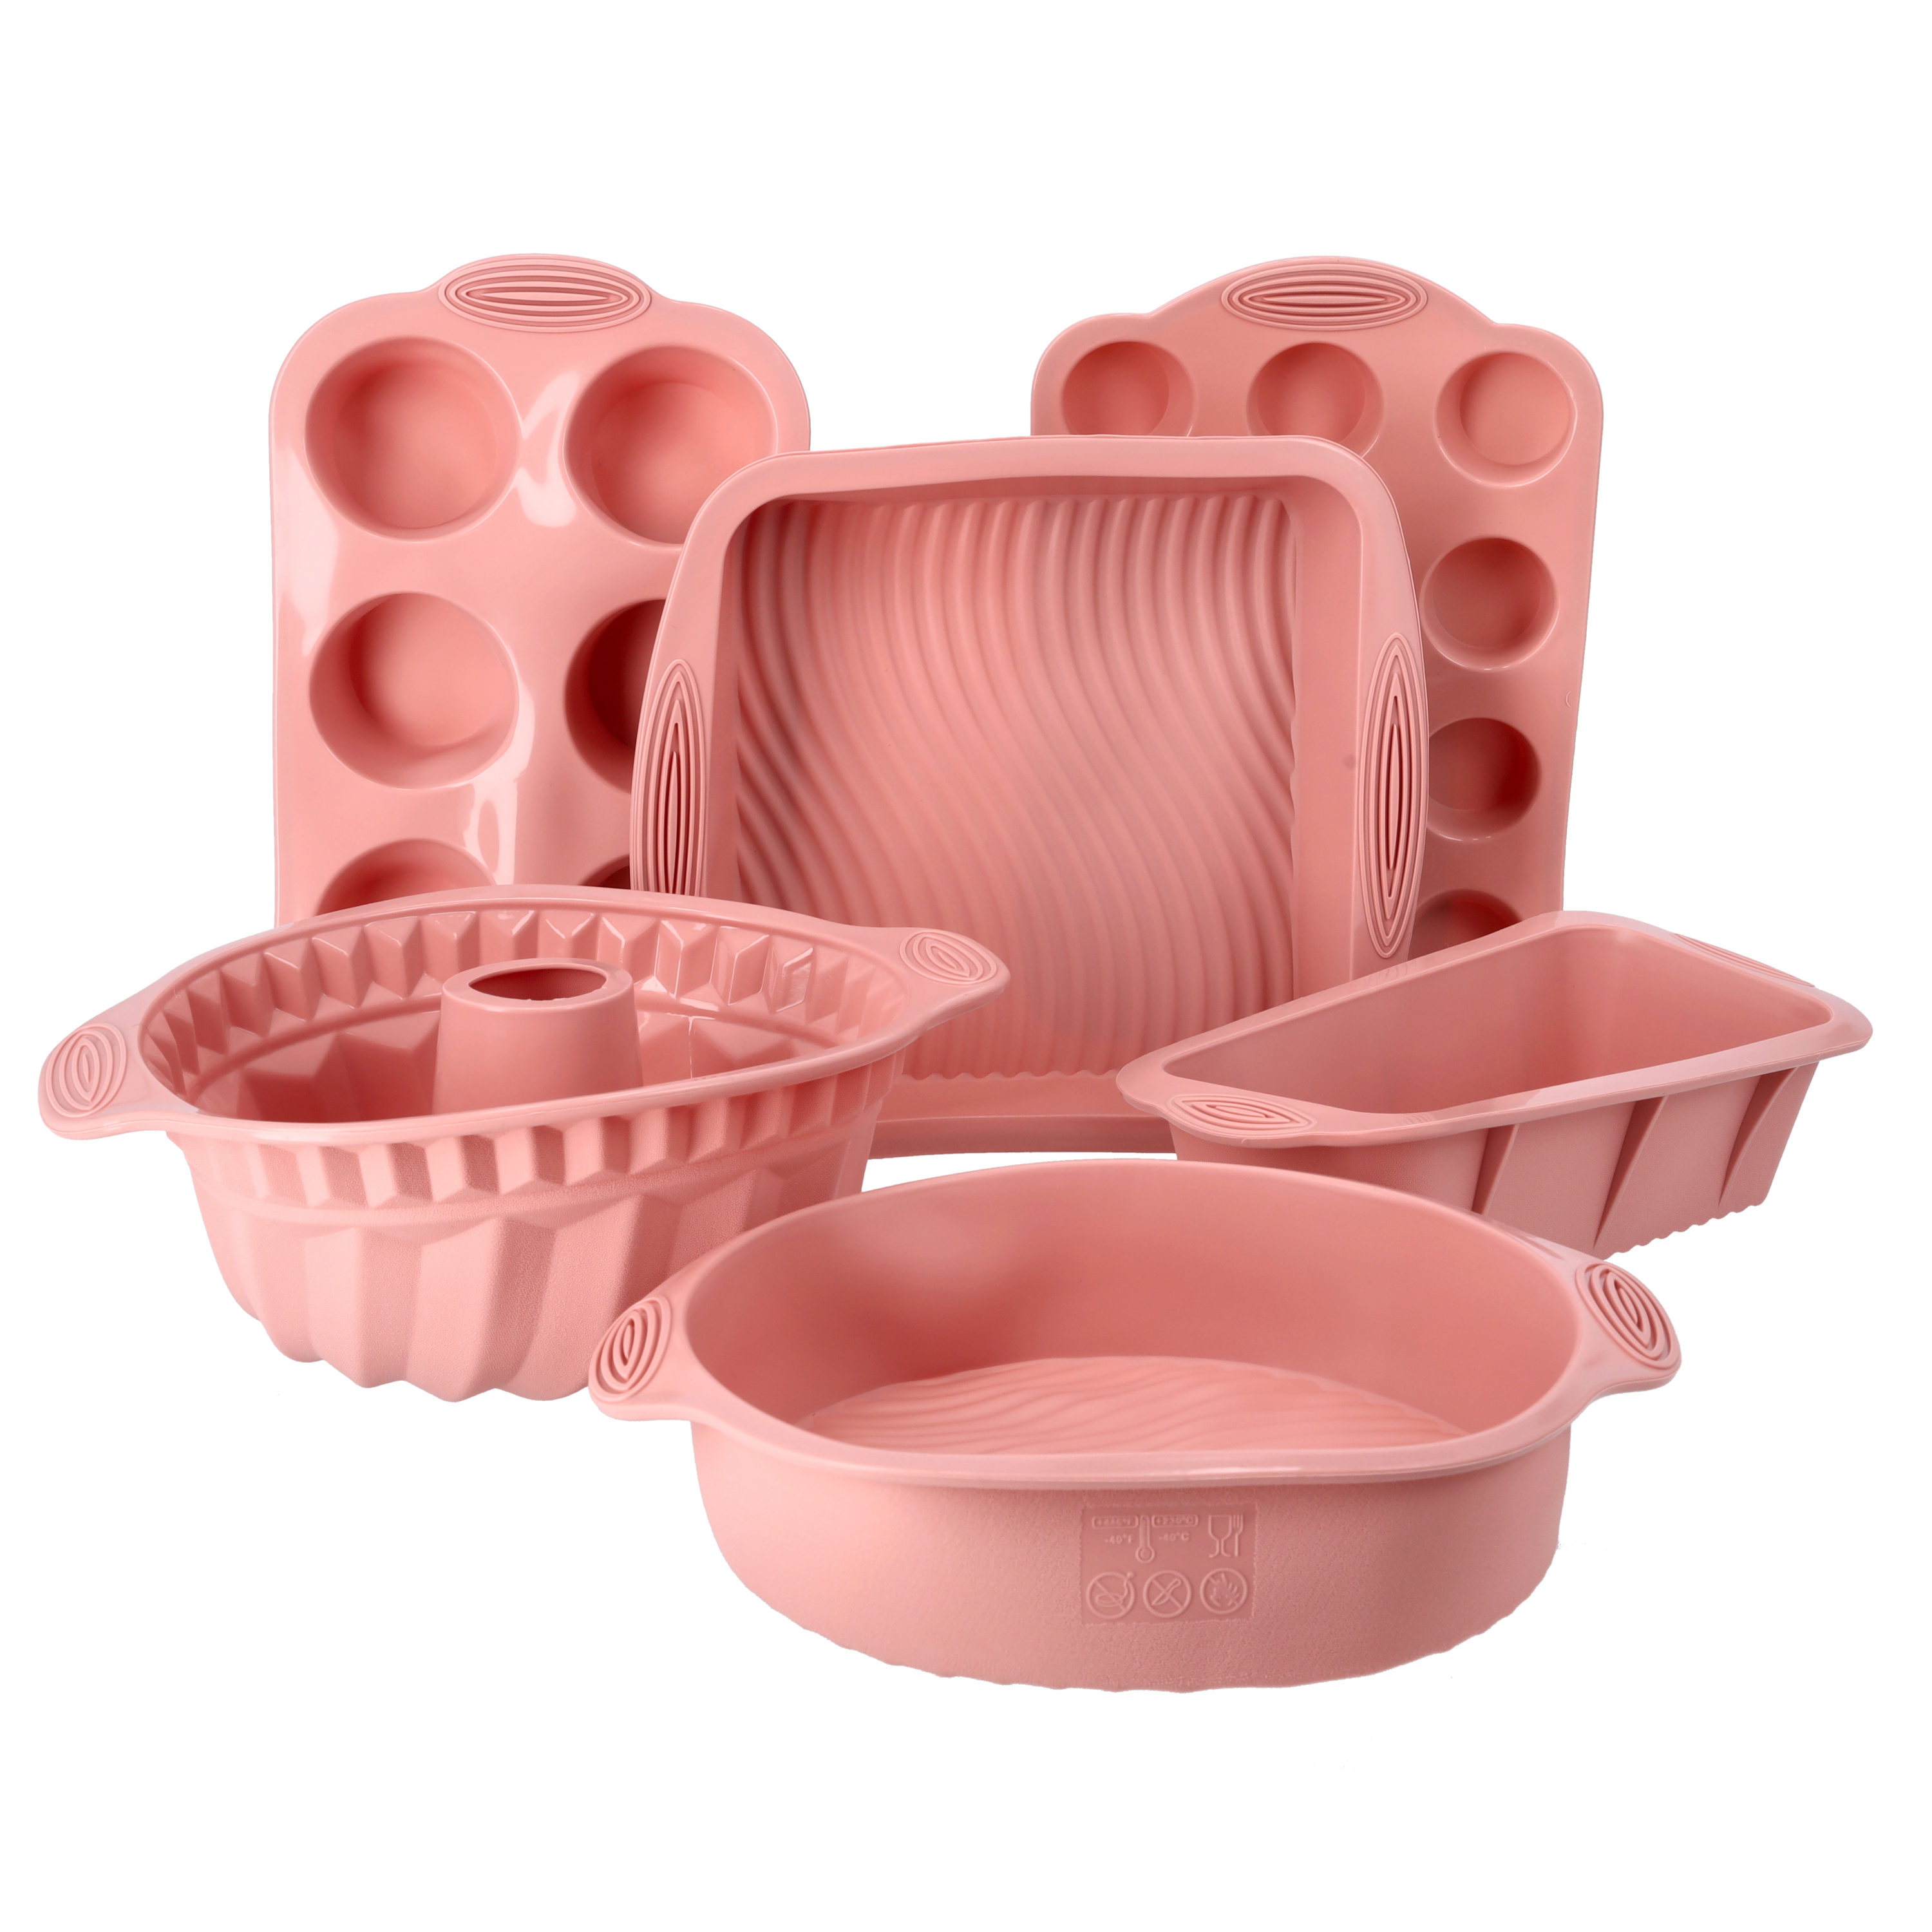 Bakers Smart - 3 In 1 Silicone Kitchenware Set. Rs.200/- Silicone